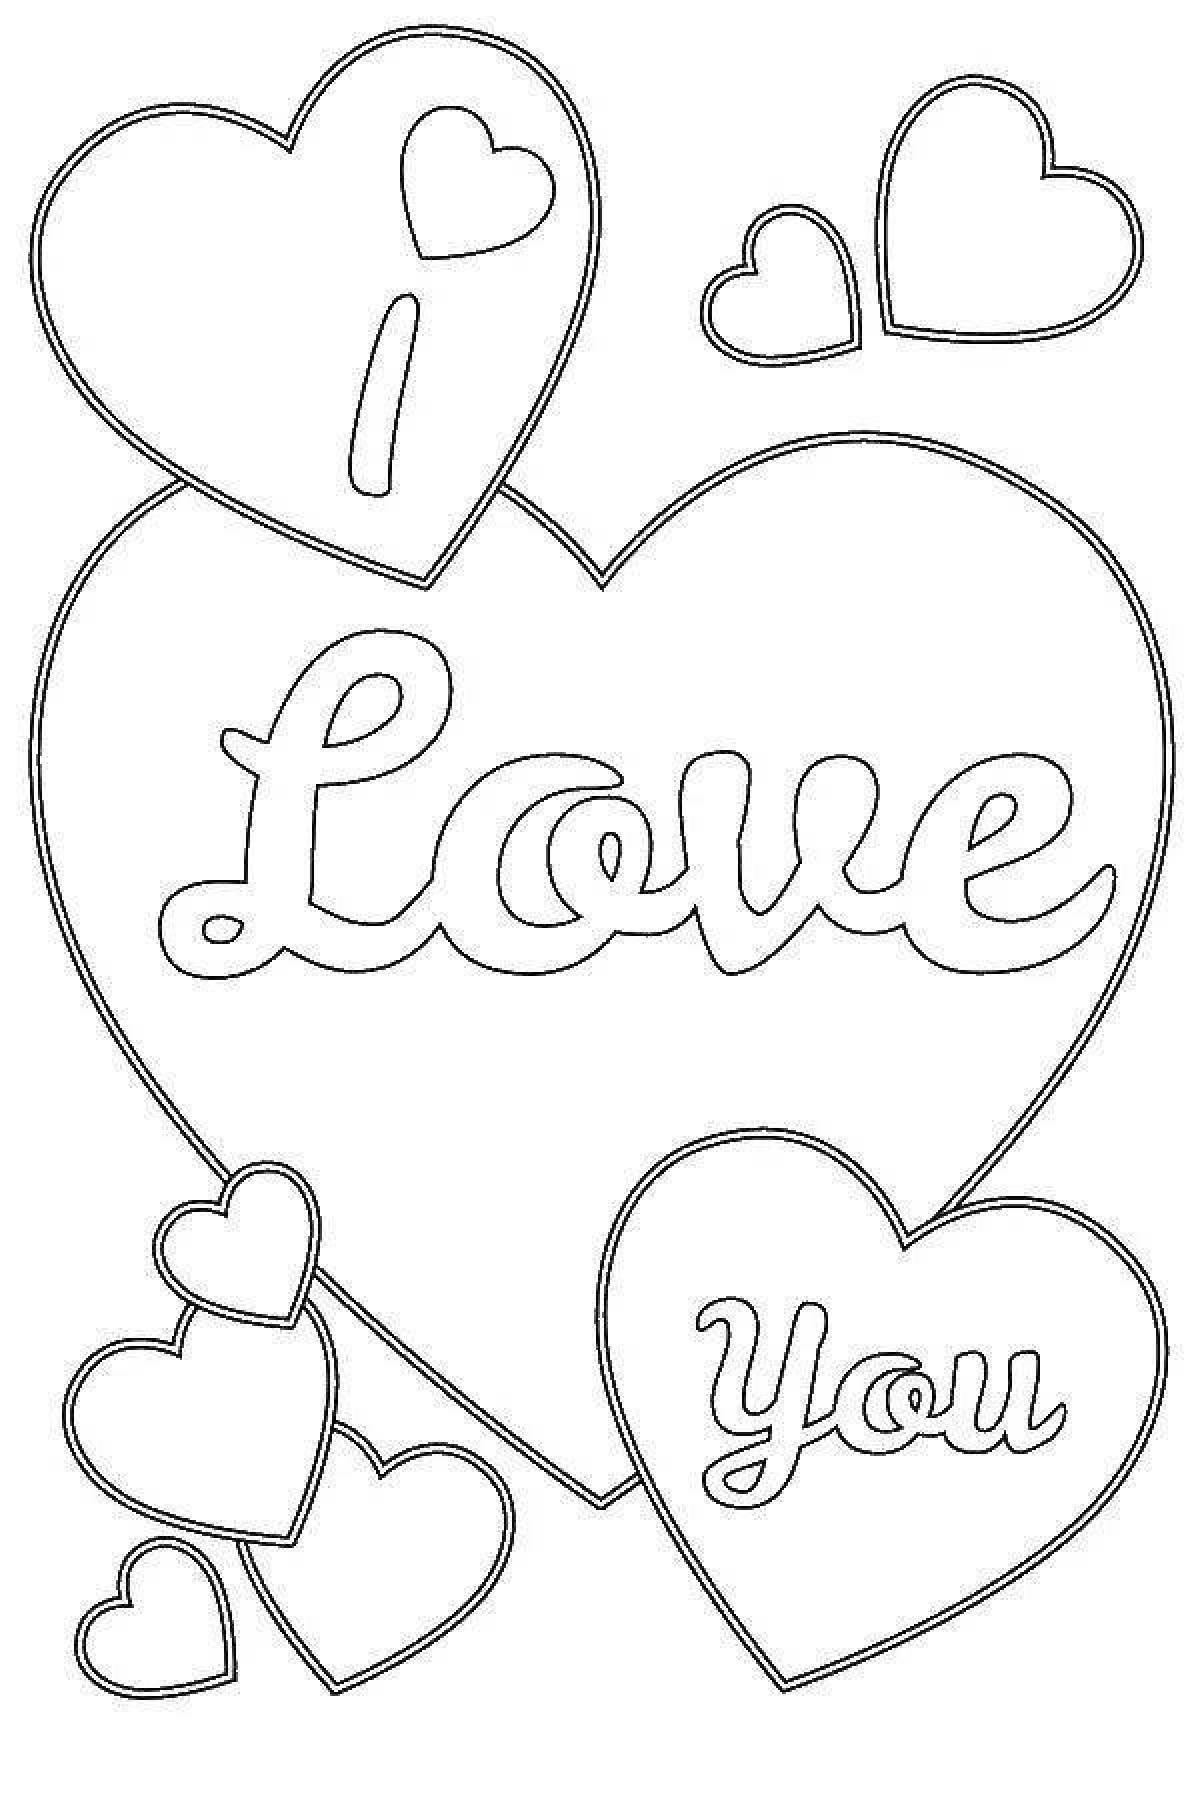 I love you glowing coloring page